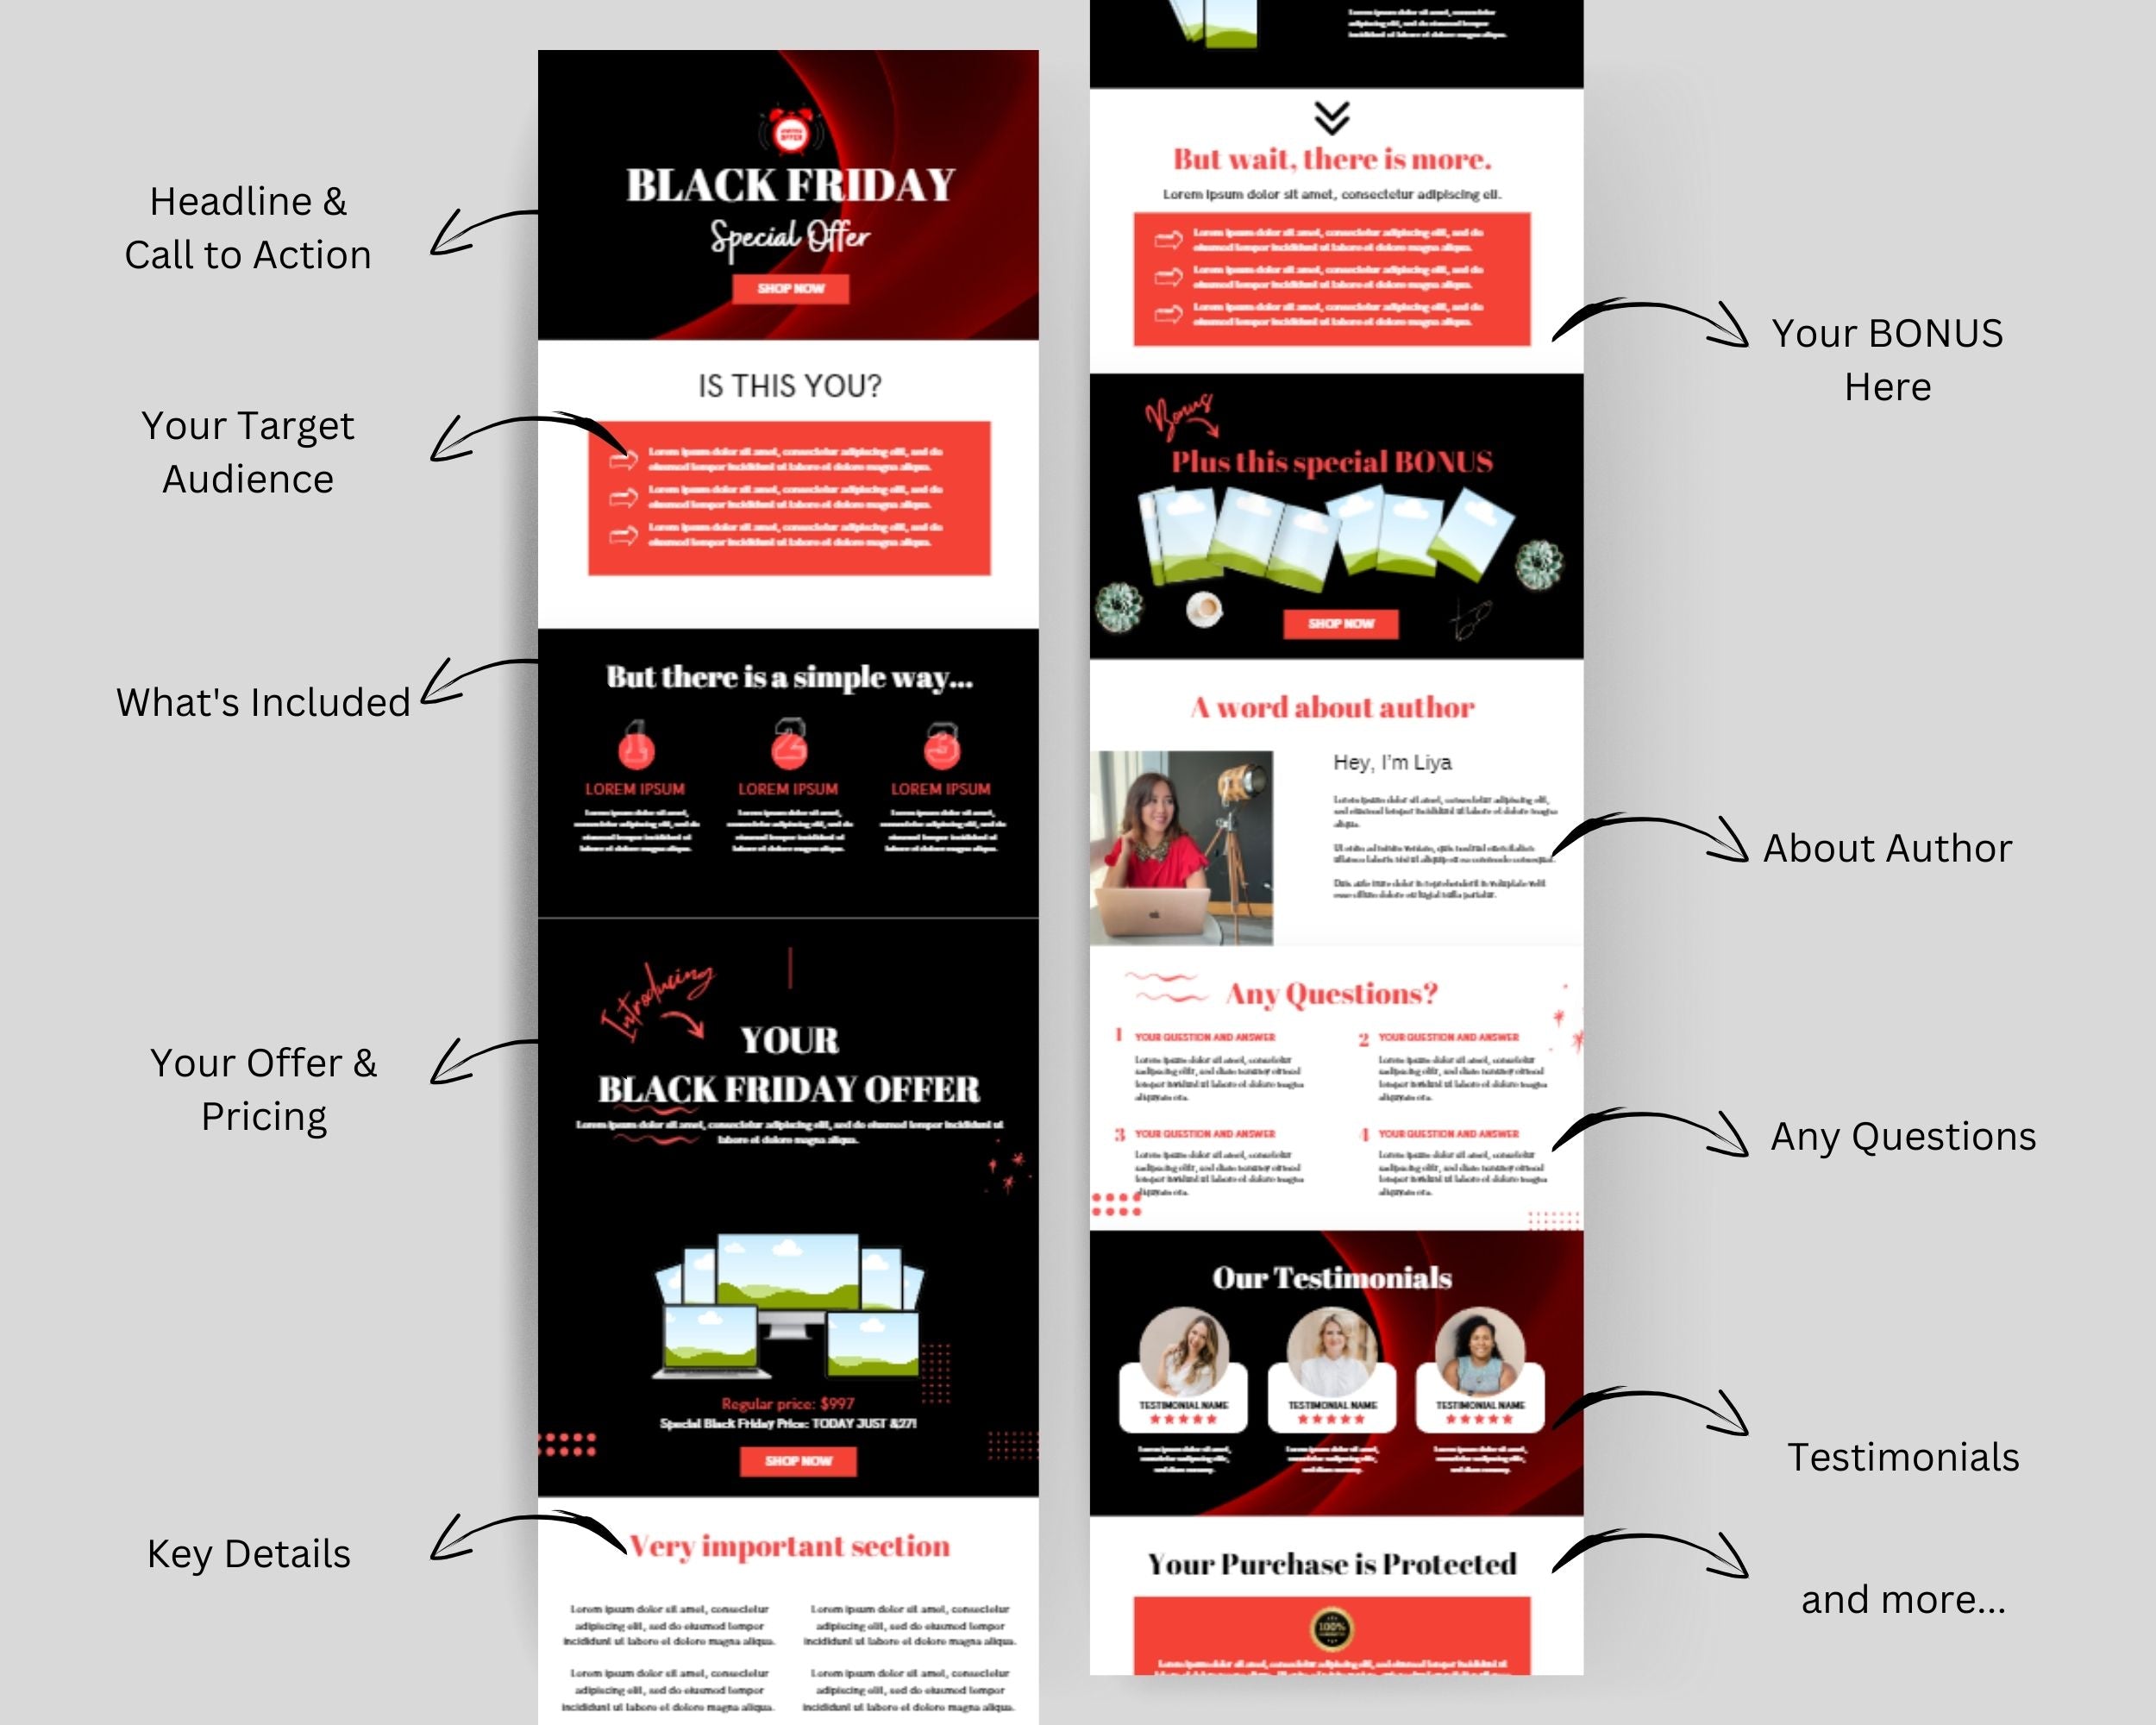 Black Friday Sales Page Template